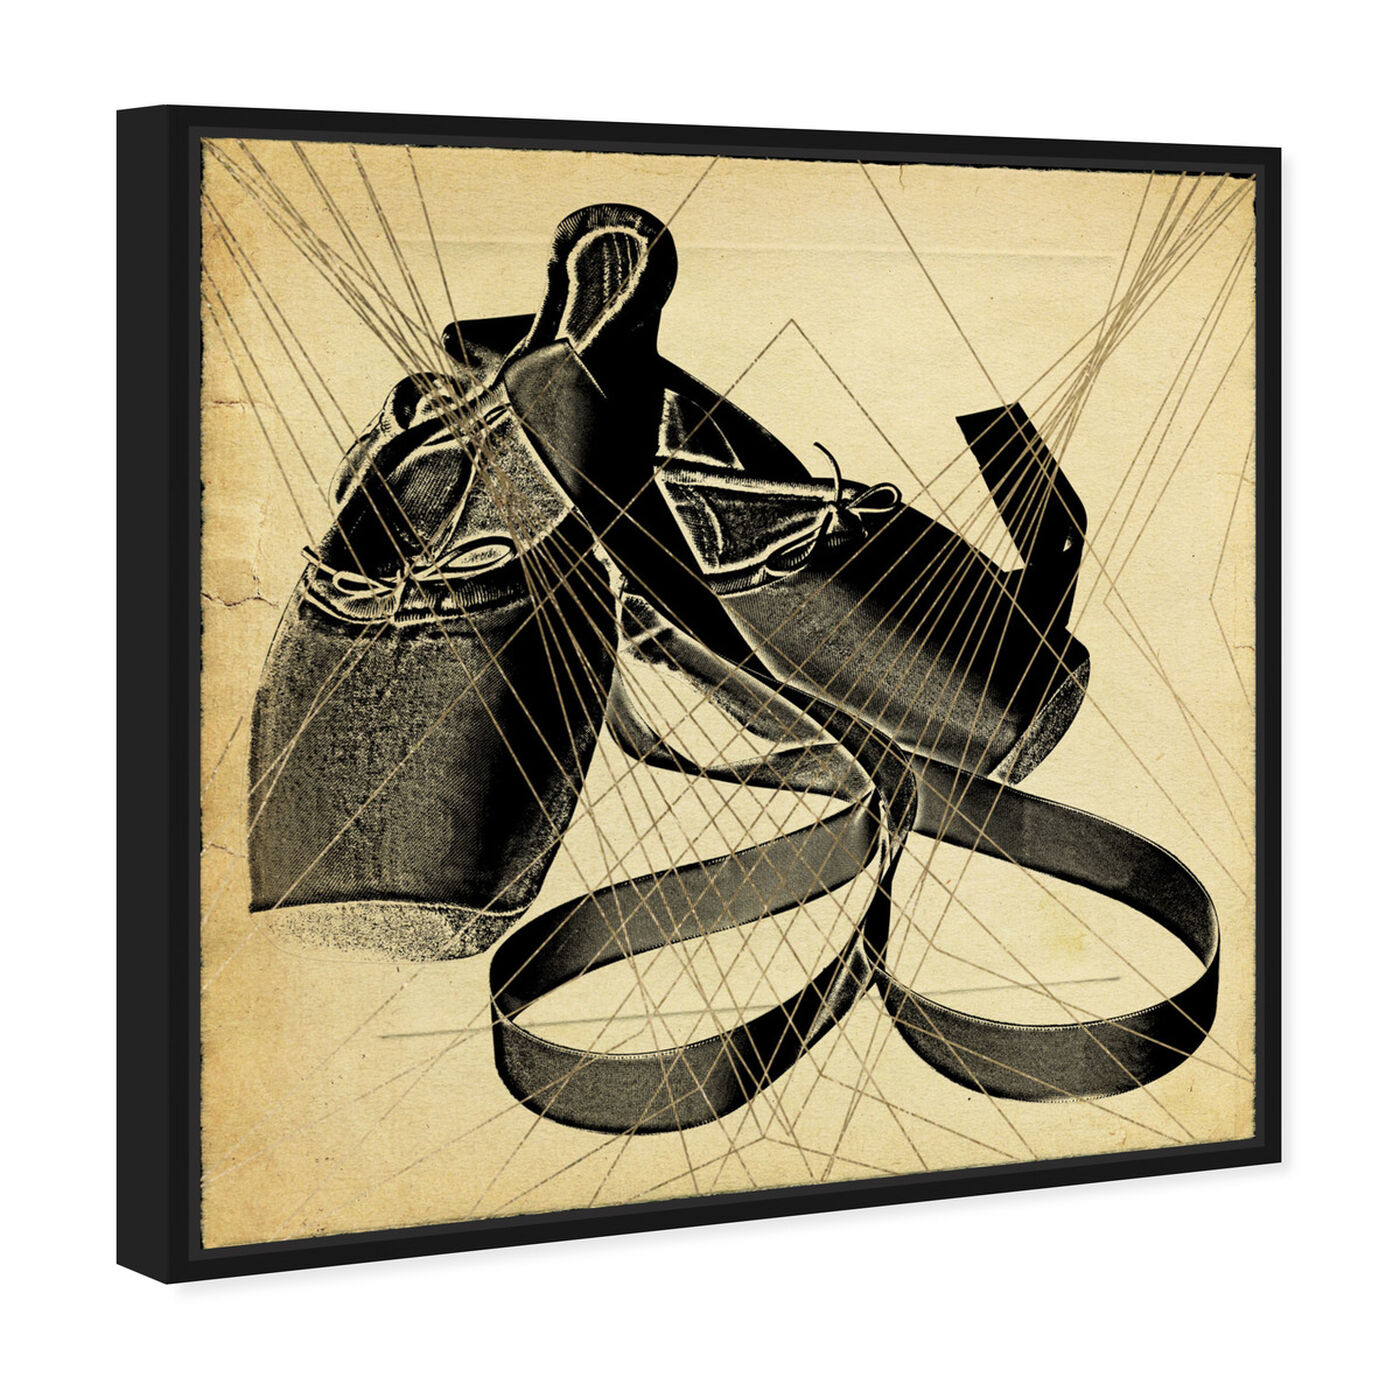 Angled view of Ballet Shoes Print featuring sports and teams and ballet art.